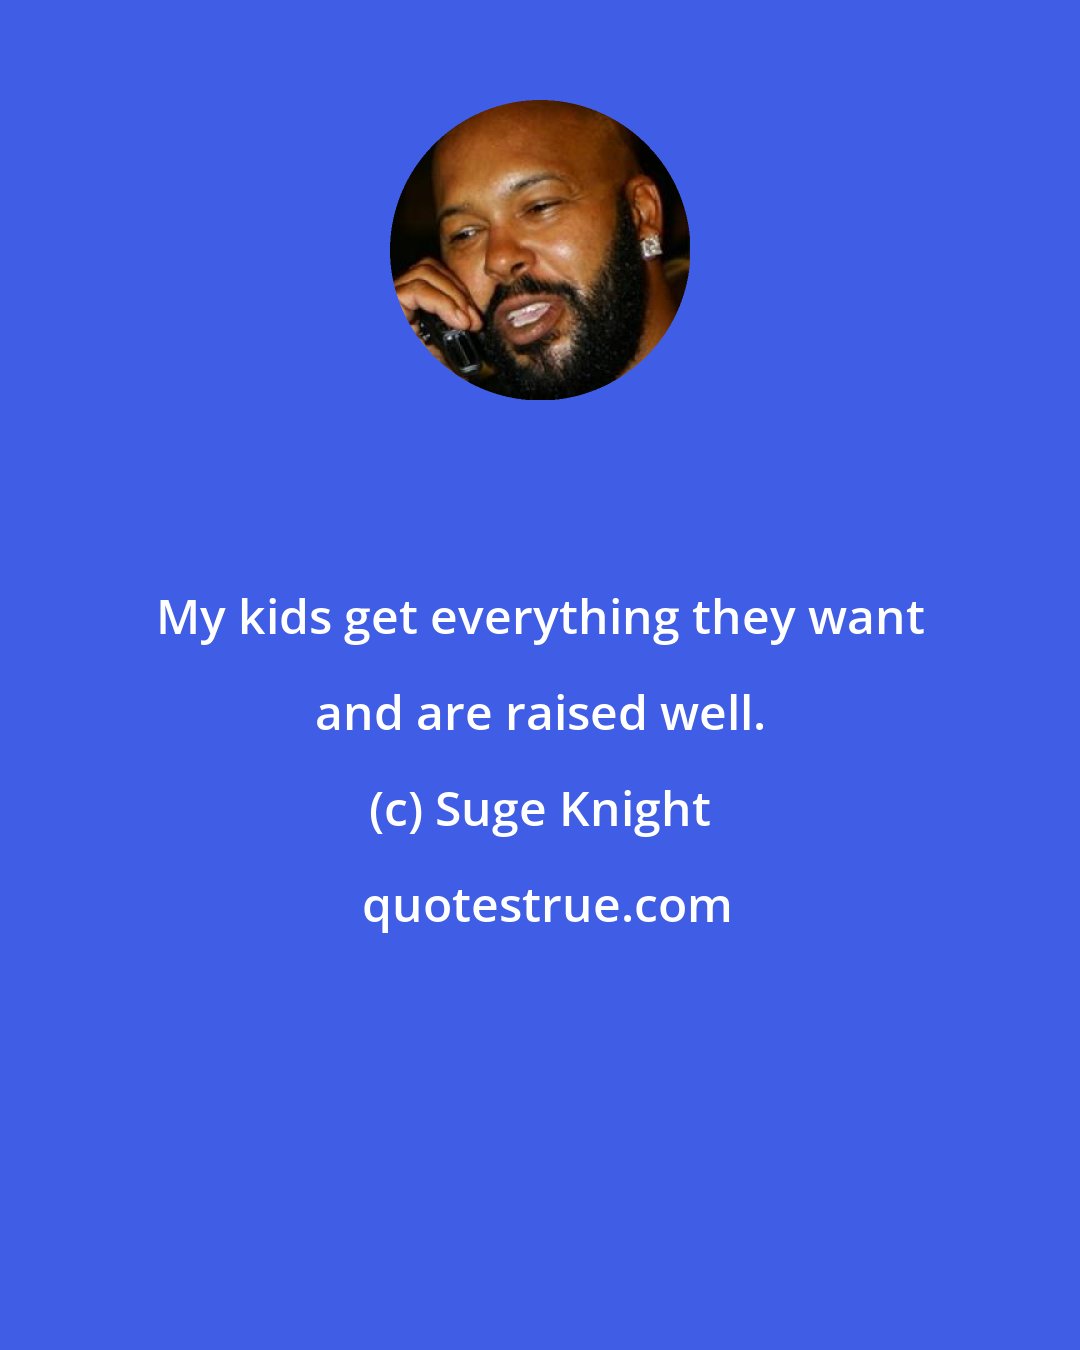 Suge Knight: My kids get everything they want and are raised well.